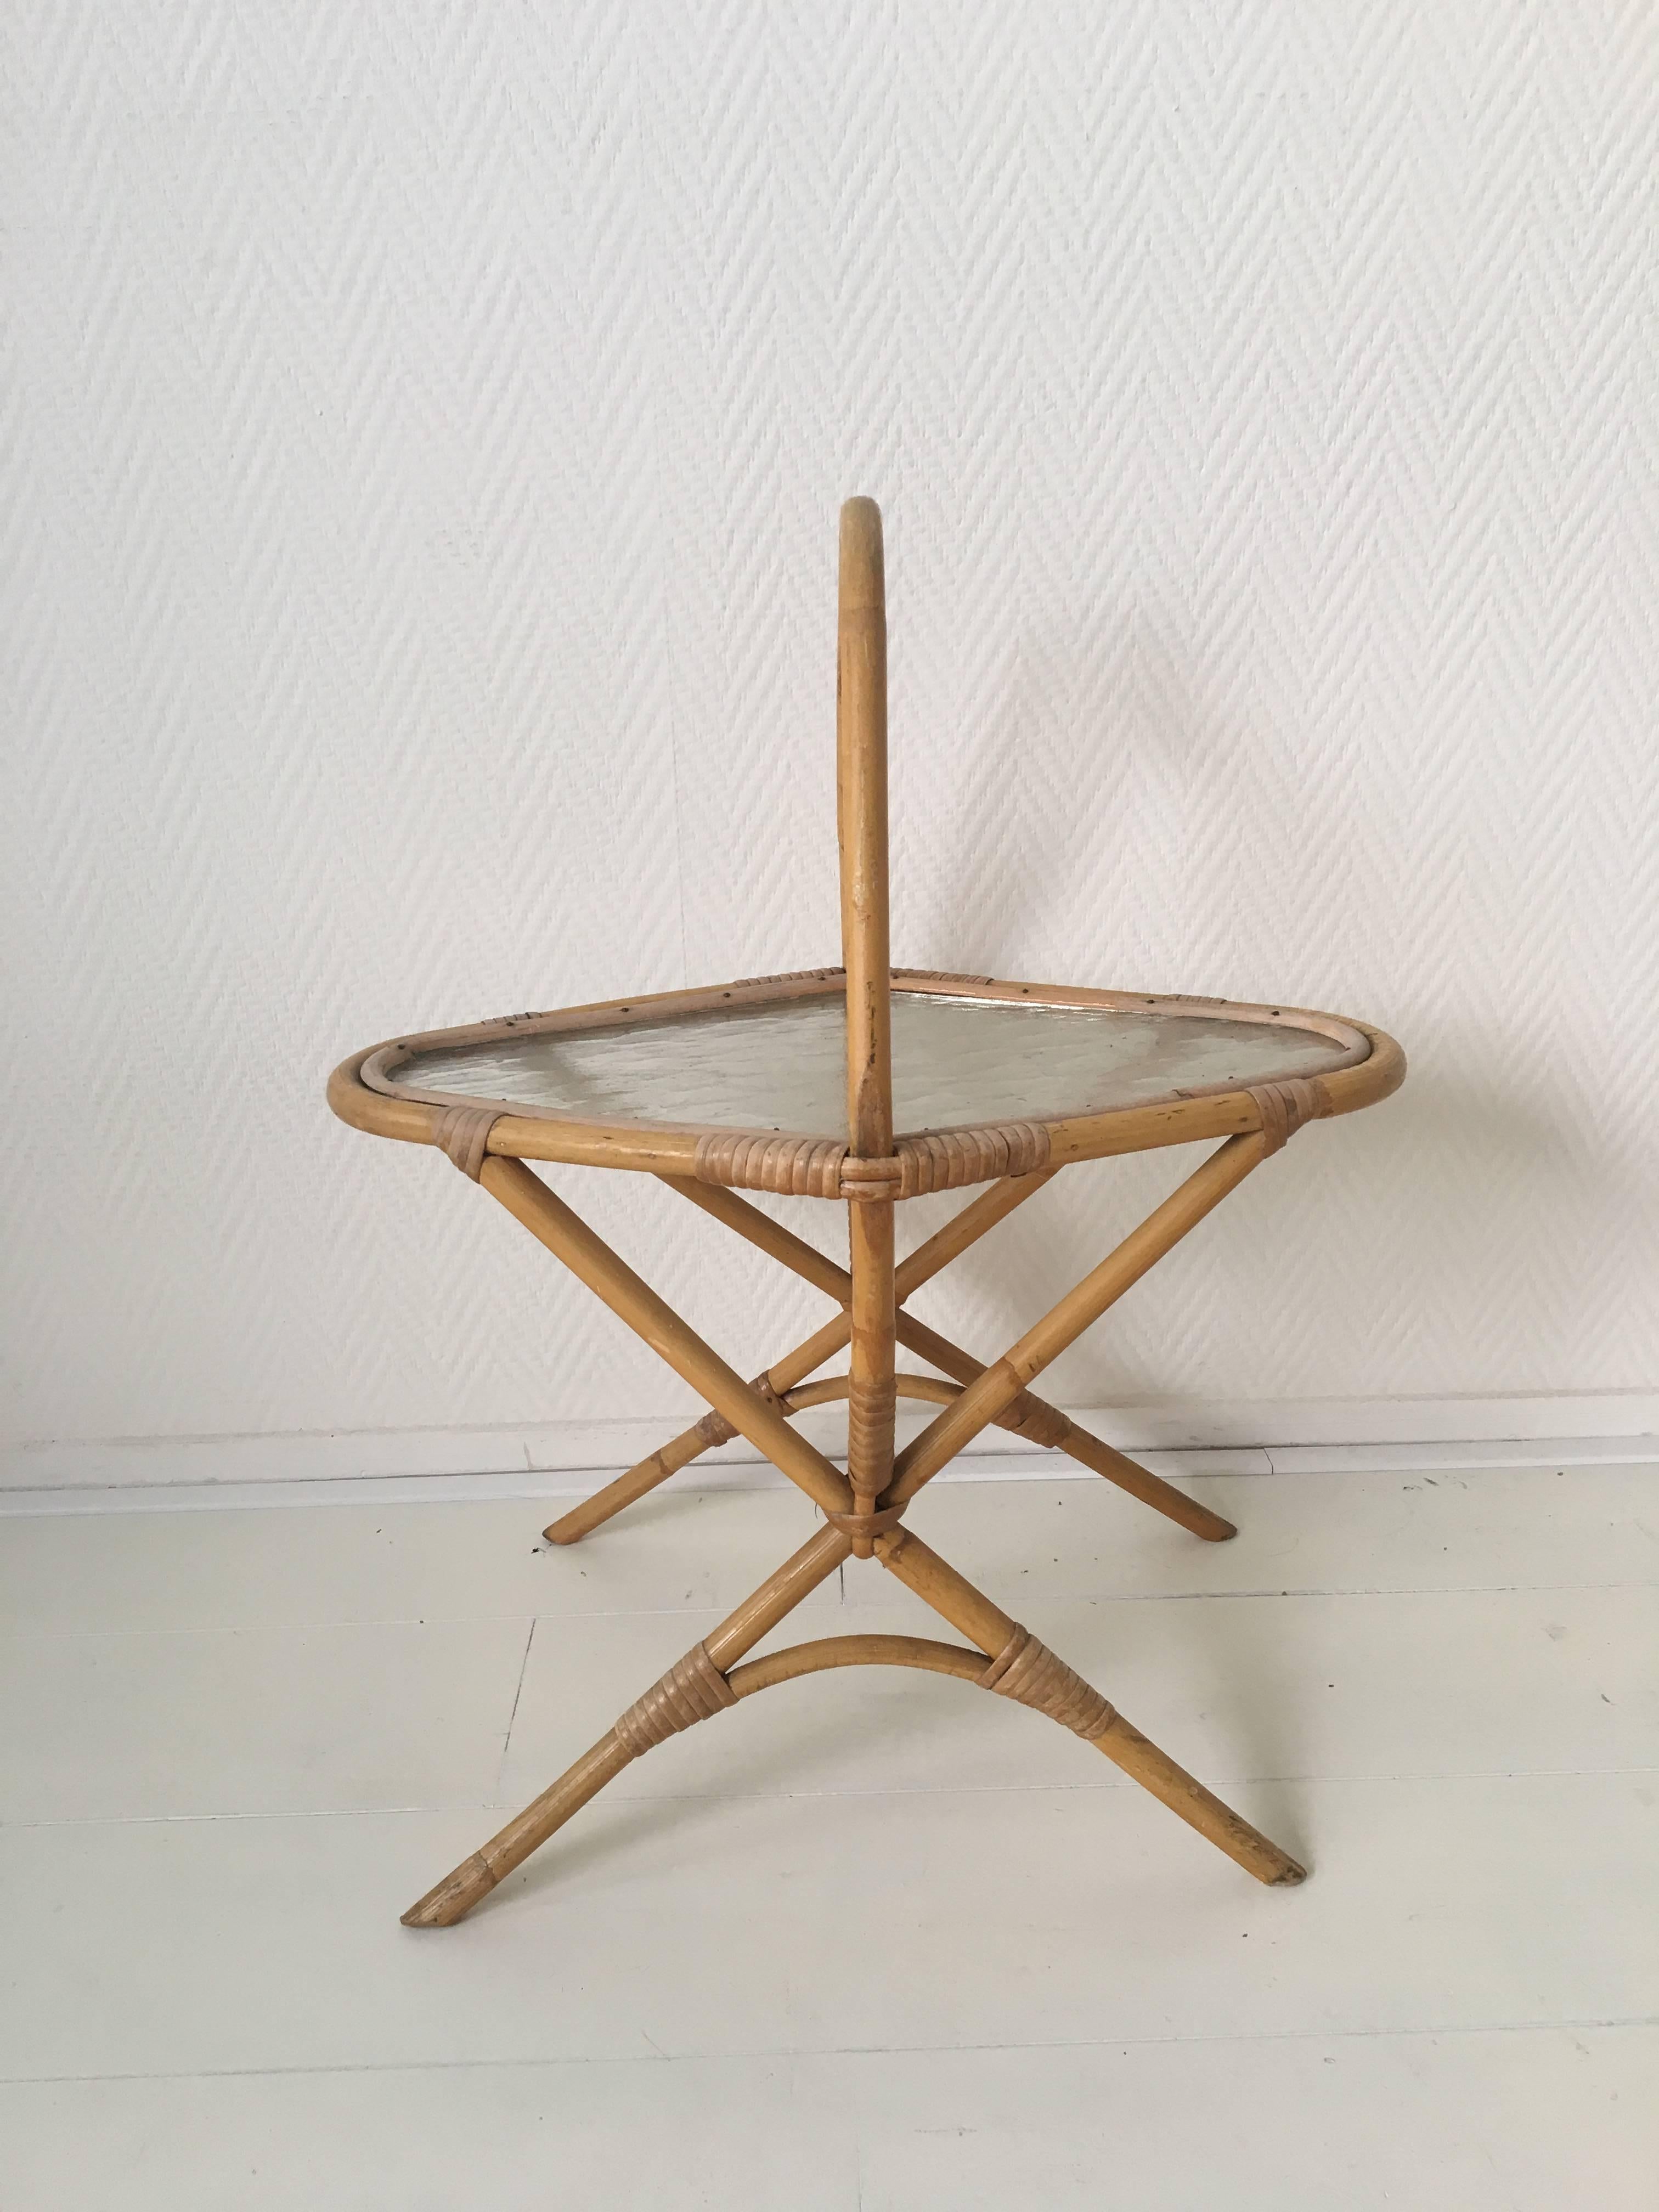 This adorable small side table or planter was designed and manufactured in the Netherlands, circa 1960s. (Very much in style of Rohé Noordwolde). It features a rattan base with a very nice glass top. The table remains in excellent condition and is a